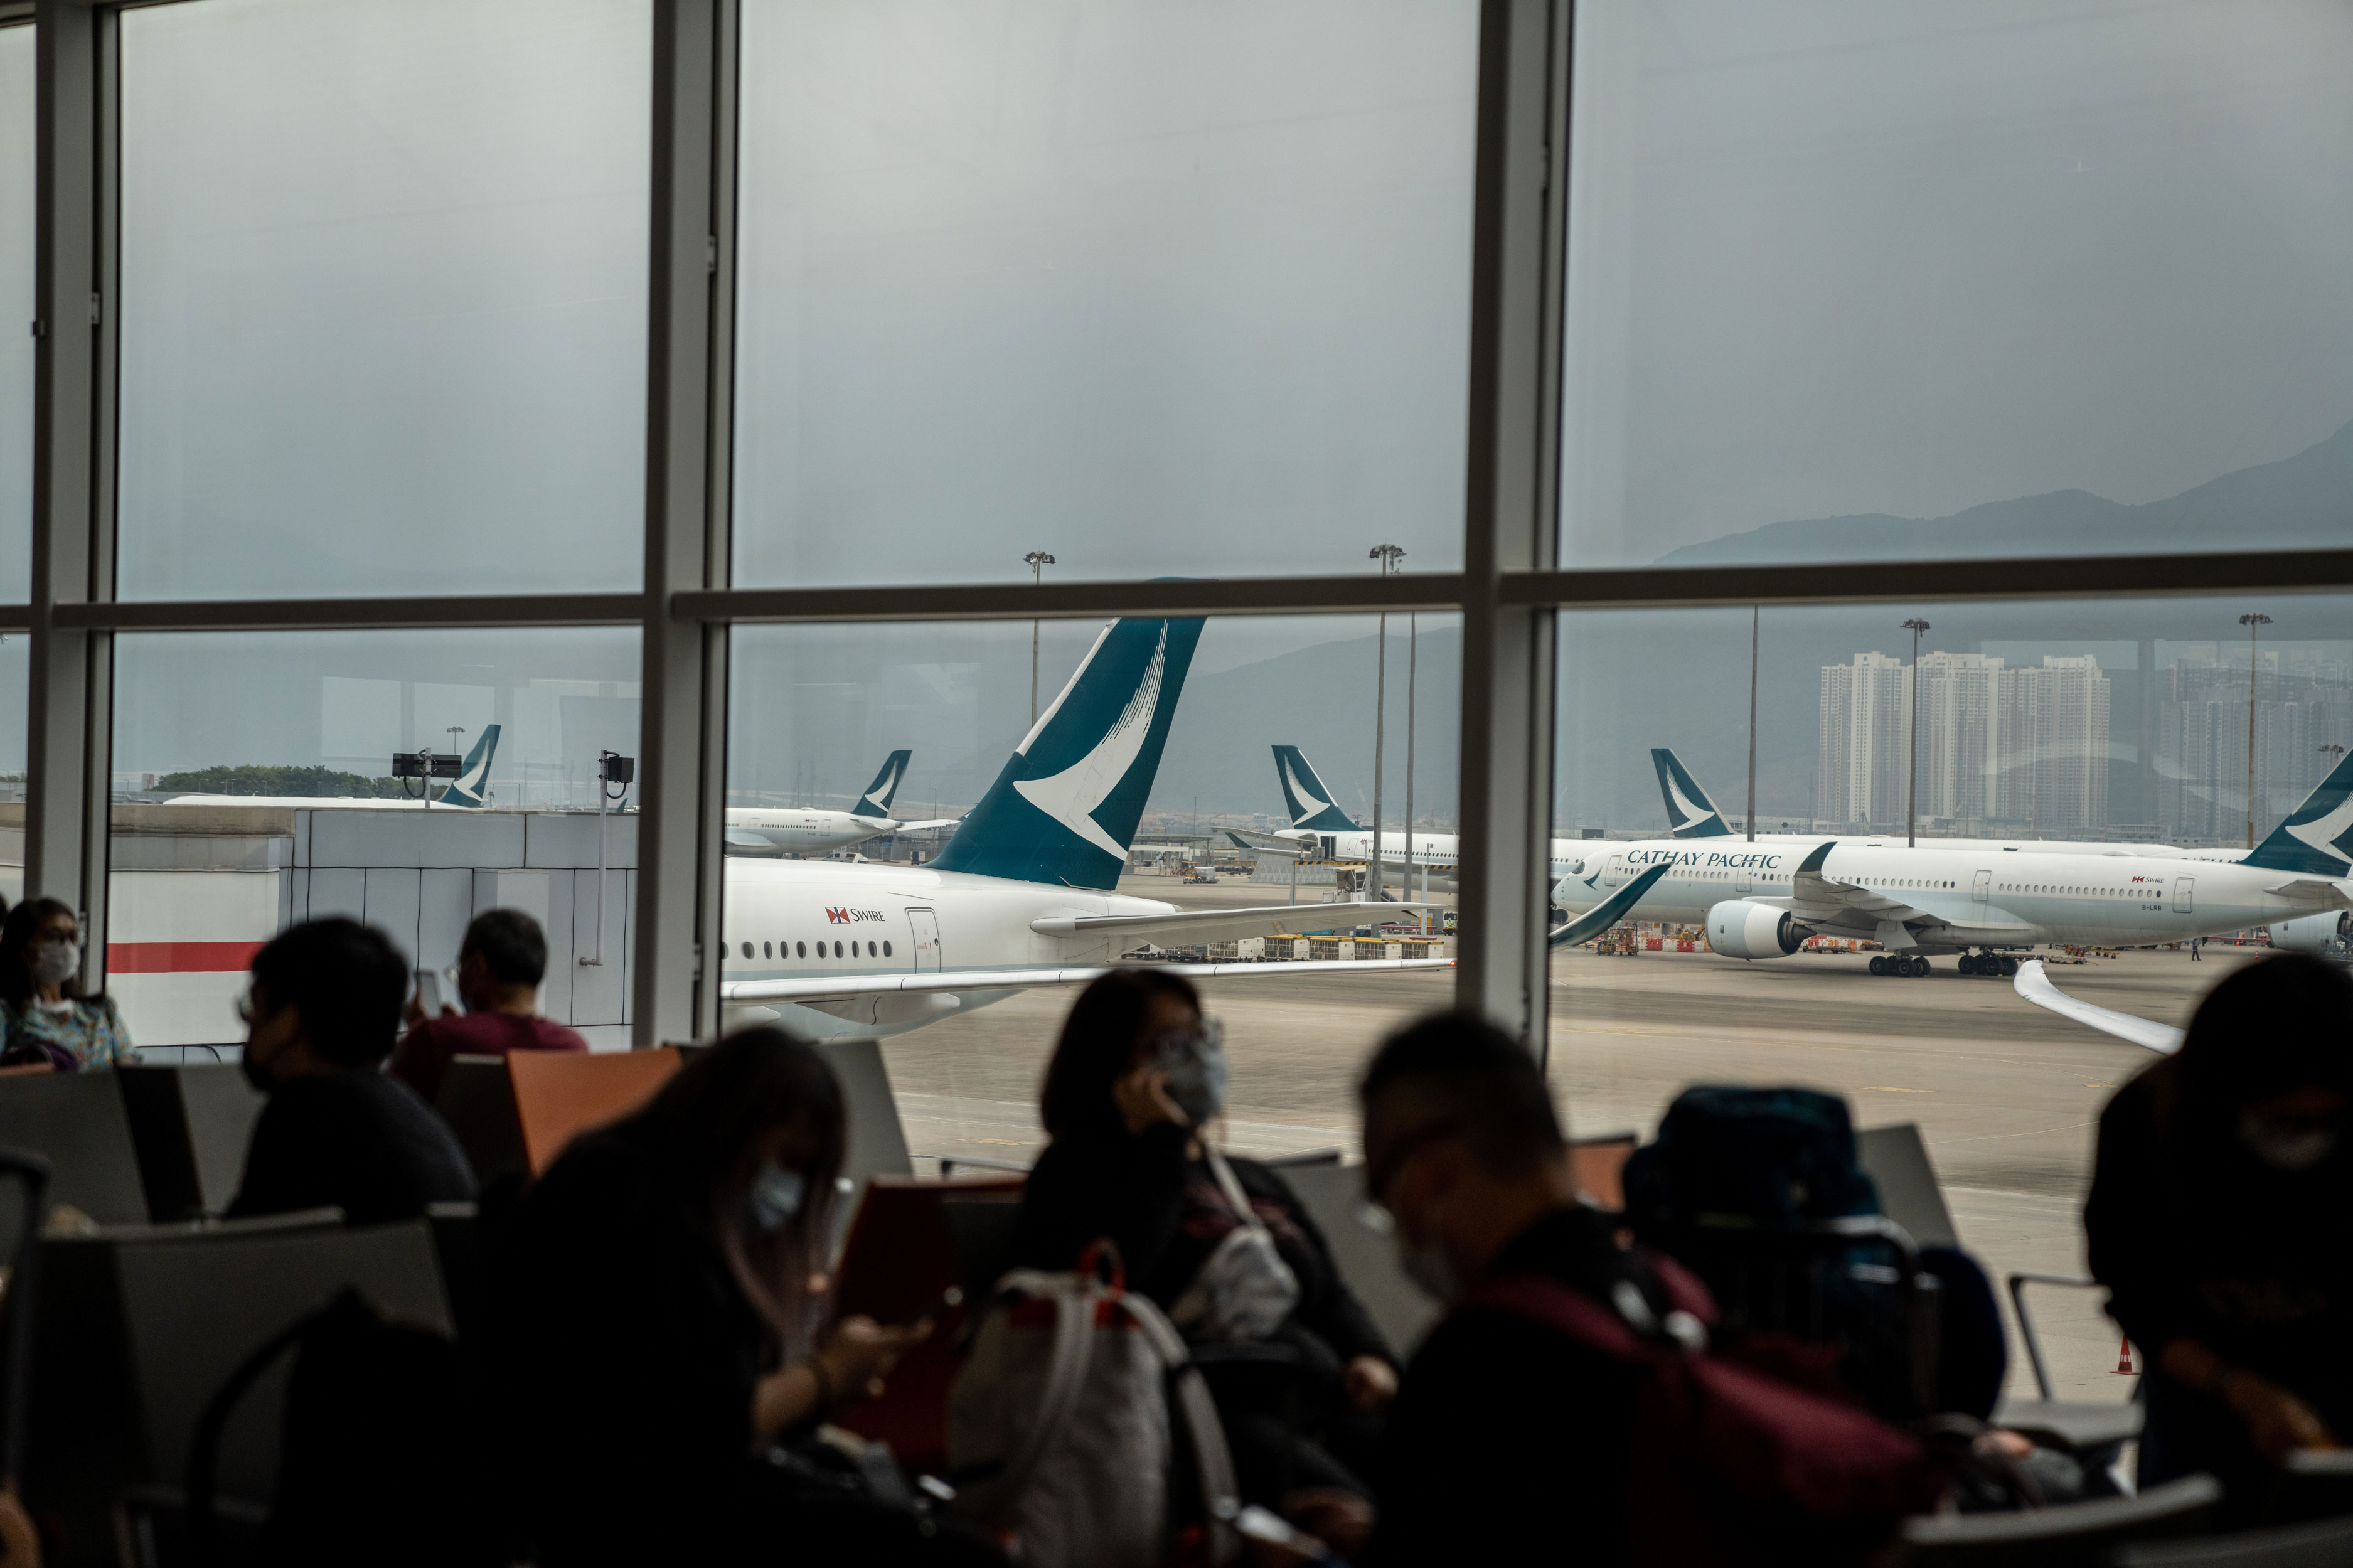 Cathay Pacific planes seen on ground at Hong Kong International Airport in this file photo from Nov. 29.